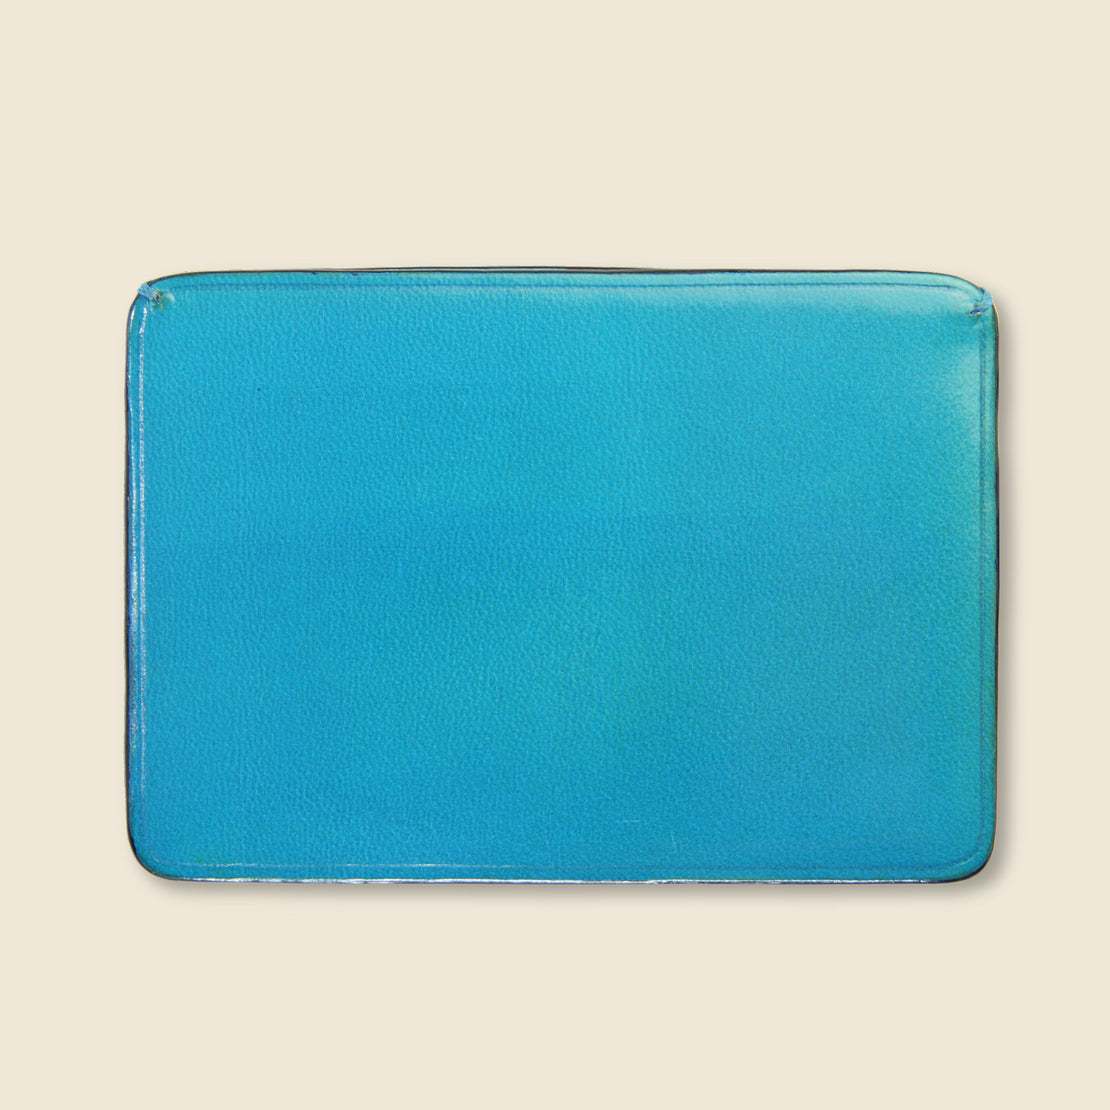 Credit Card Case - Cadet Blue - Il Bussetto - STAG Provisions - Accessories - Wallets